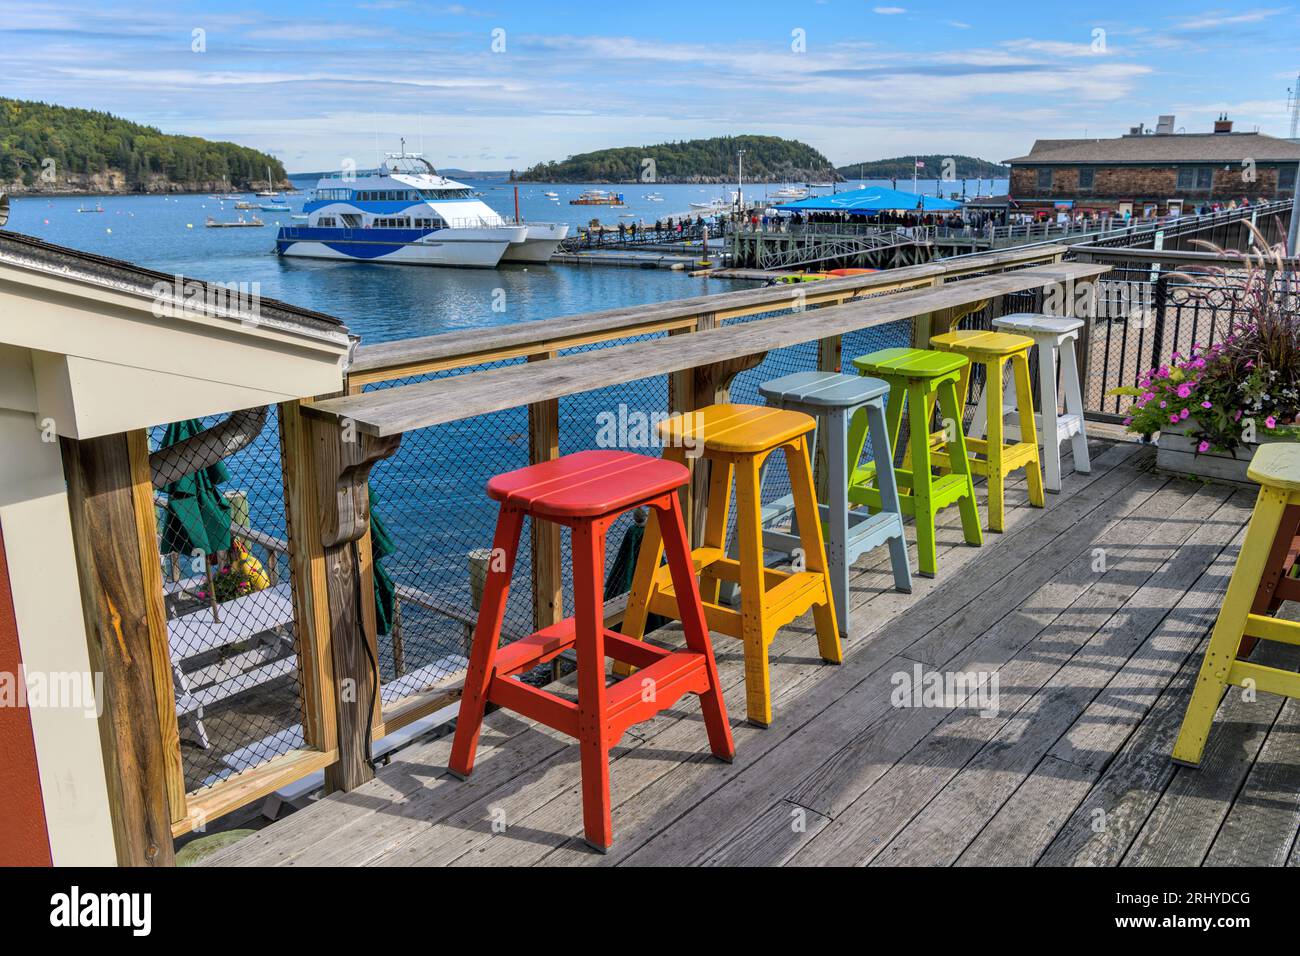 Seaside Resort - A sunny Autumn morning view of a quiet waterfront resting area at shore of Frenchman Bay. Bar Harbor, Mount Desert Island, Maine, USA. Stock Photo